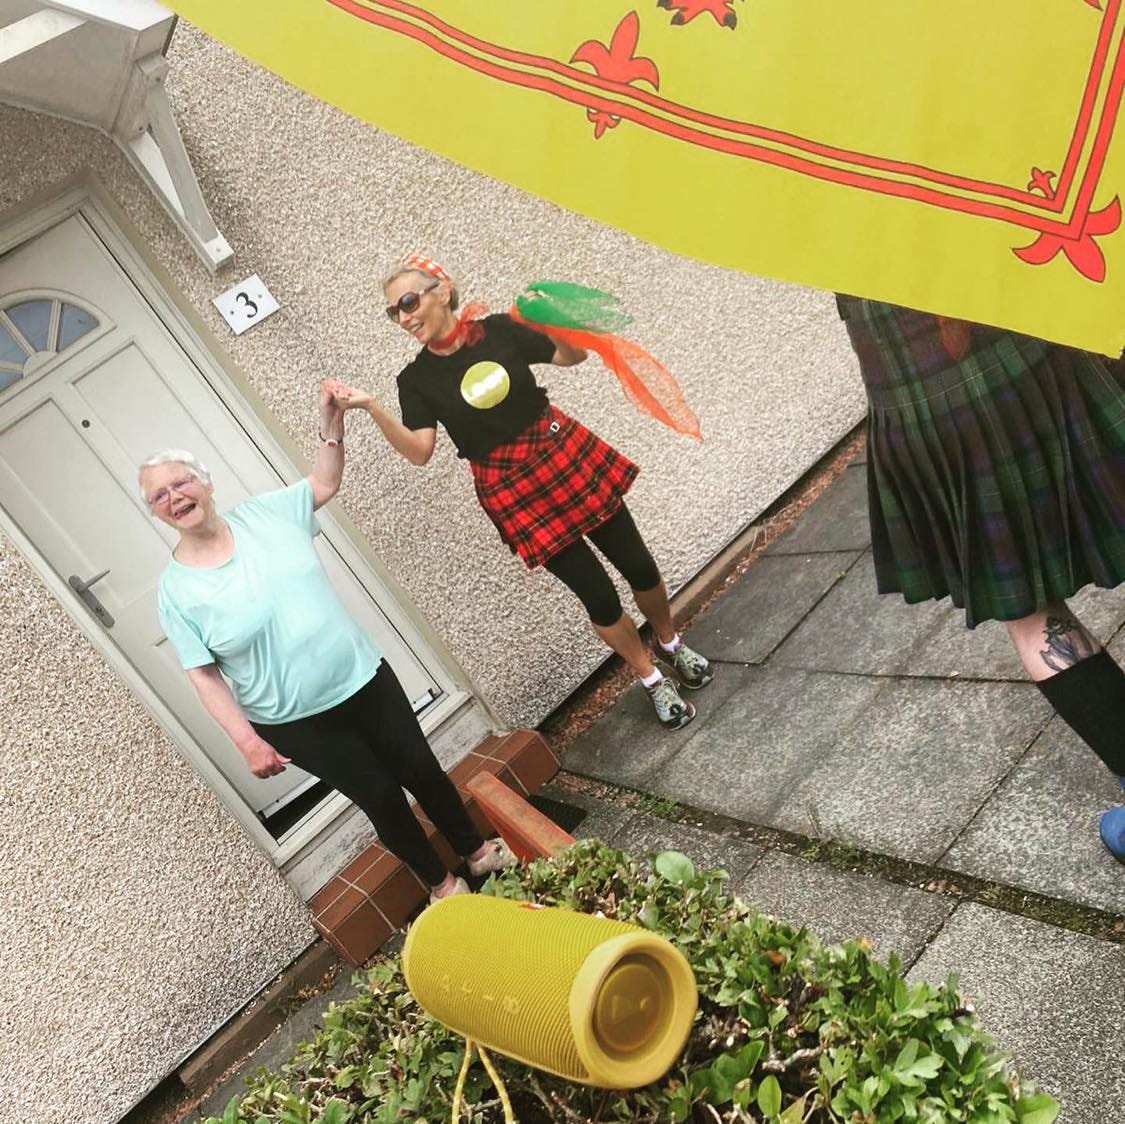 An image of Laura, a middle-aged white woman with short blonde hair, holding hands with an elderly white lady with short white hair. They are standing outside a house with a white door. Laura is wearing a tartan skirt. There is a glimpse of a man wearing a tartan kilt in front but he is wrapped in a yellow Scottish flag with a red border and insignia of lions.